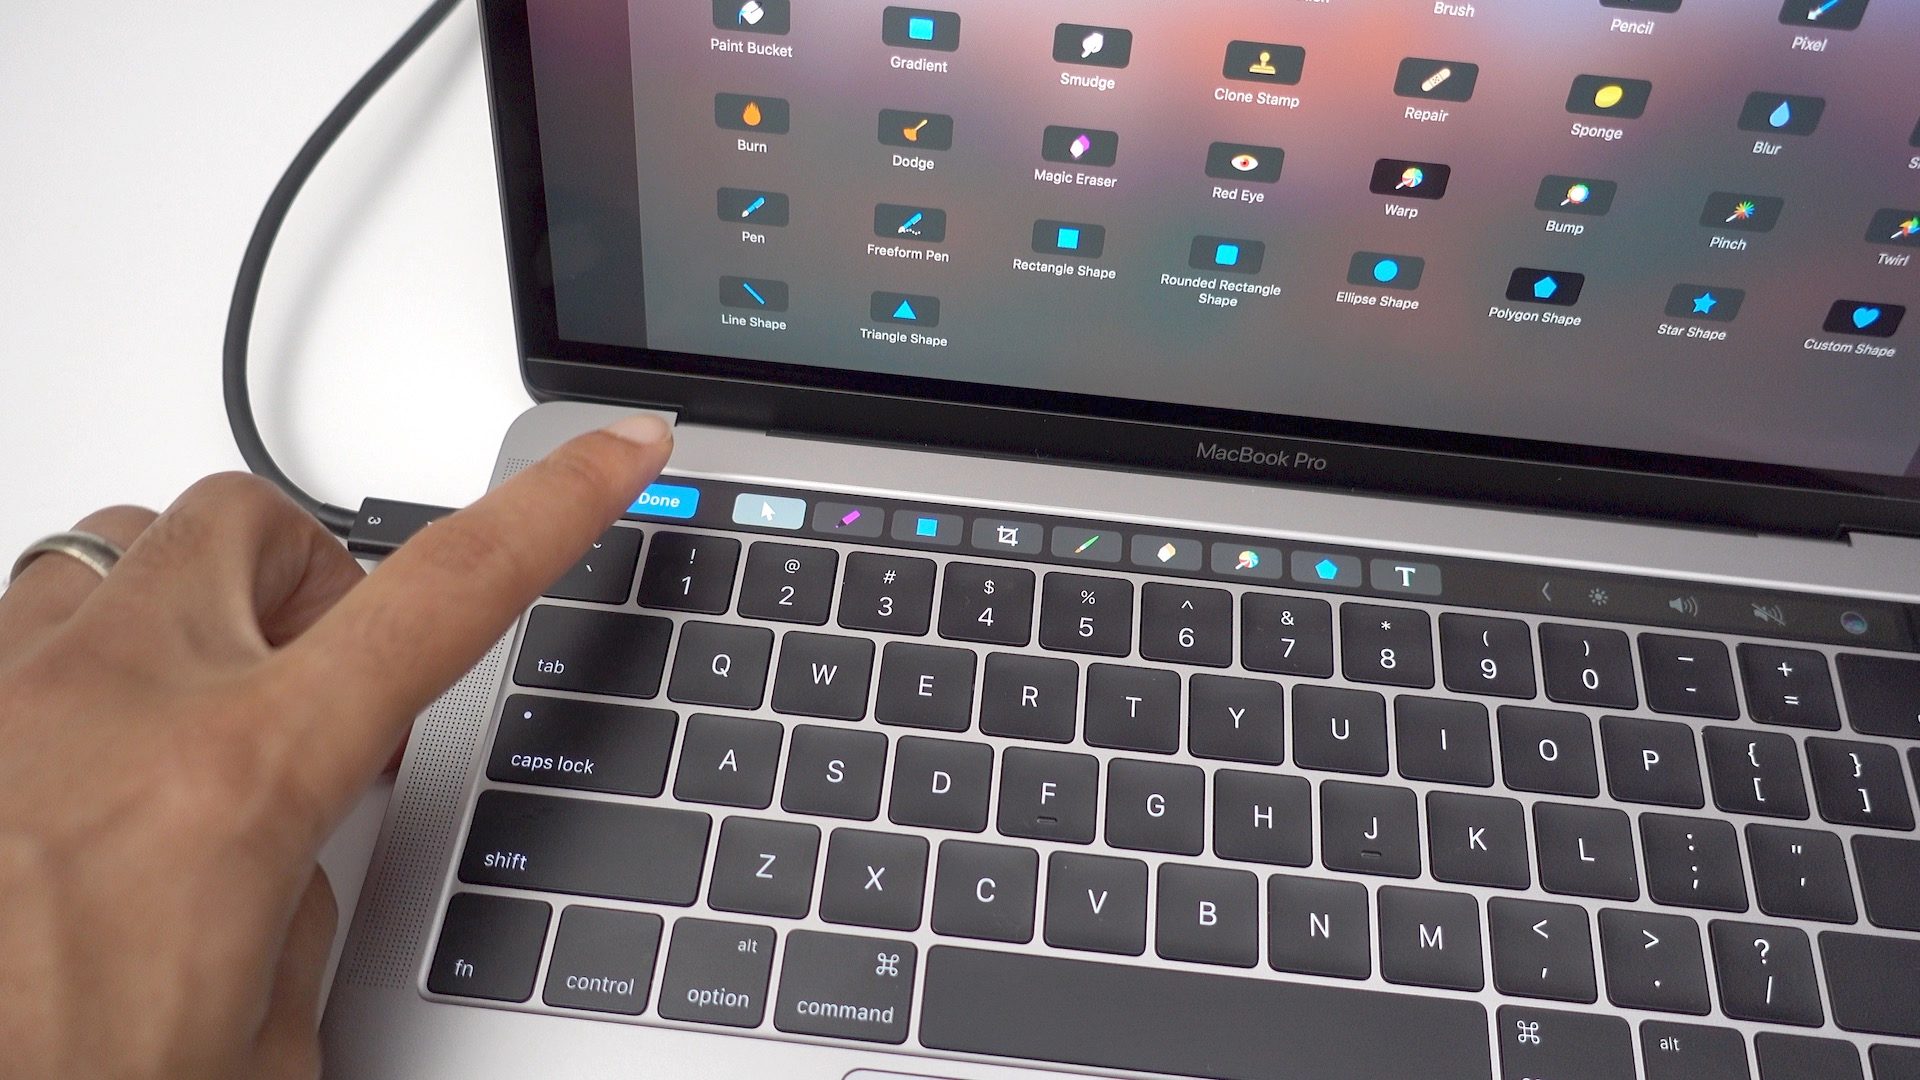 How to quickly switch apps on macbook air